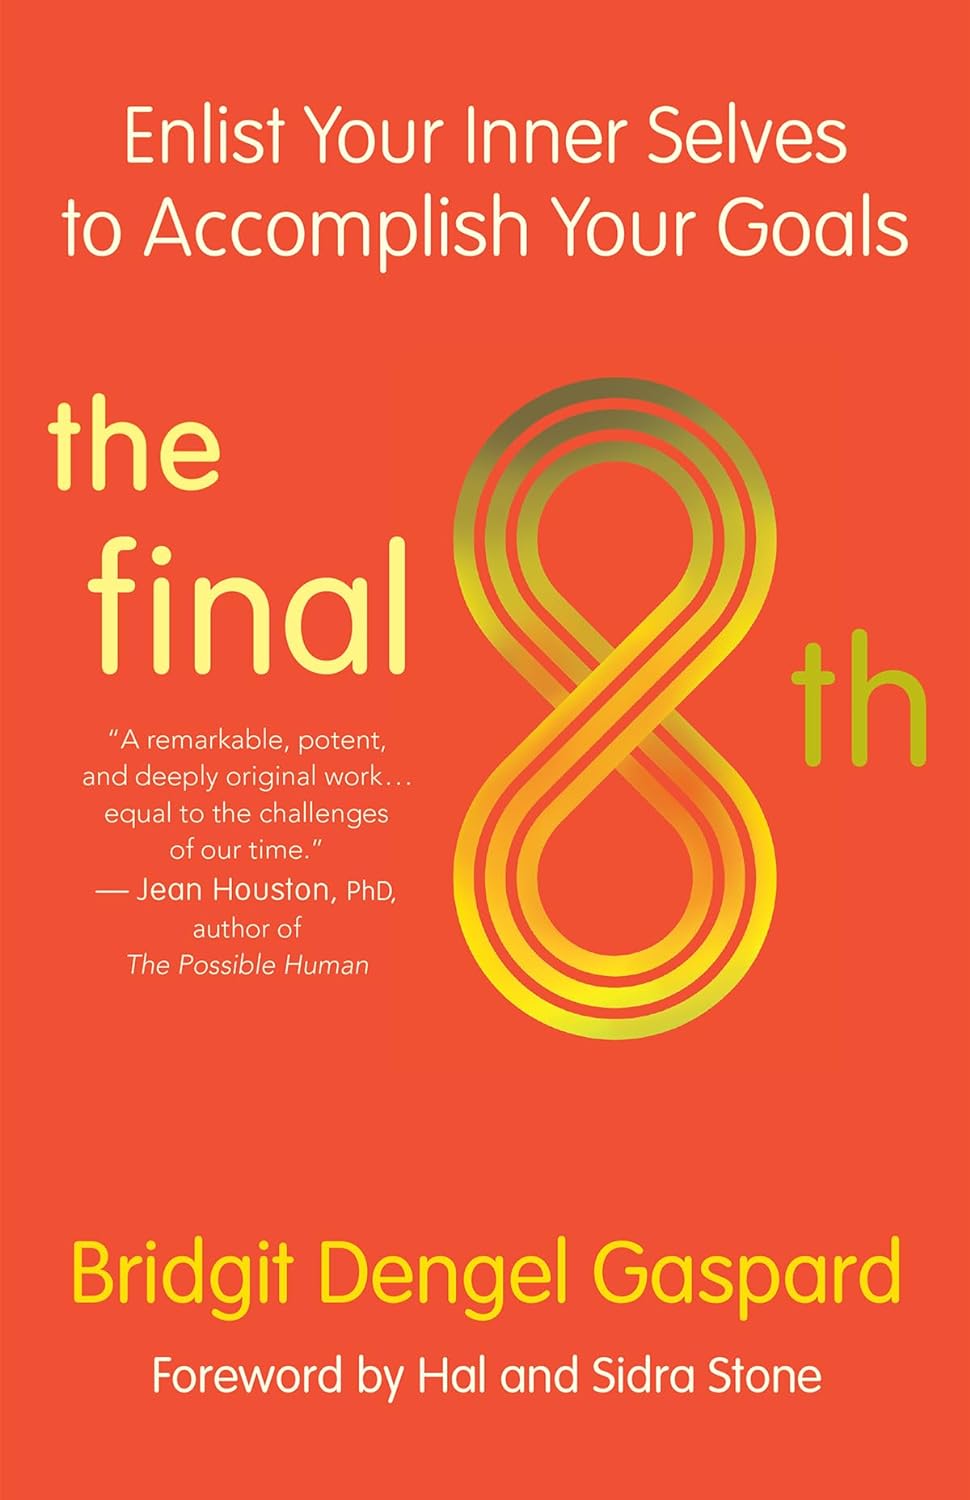 The Final 8th: Enlist Your Inner Selves to Accomplish Your Goals Paperback – September 15, 2020